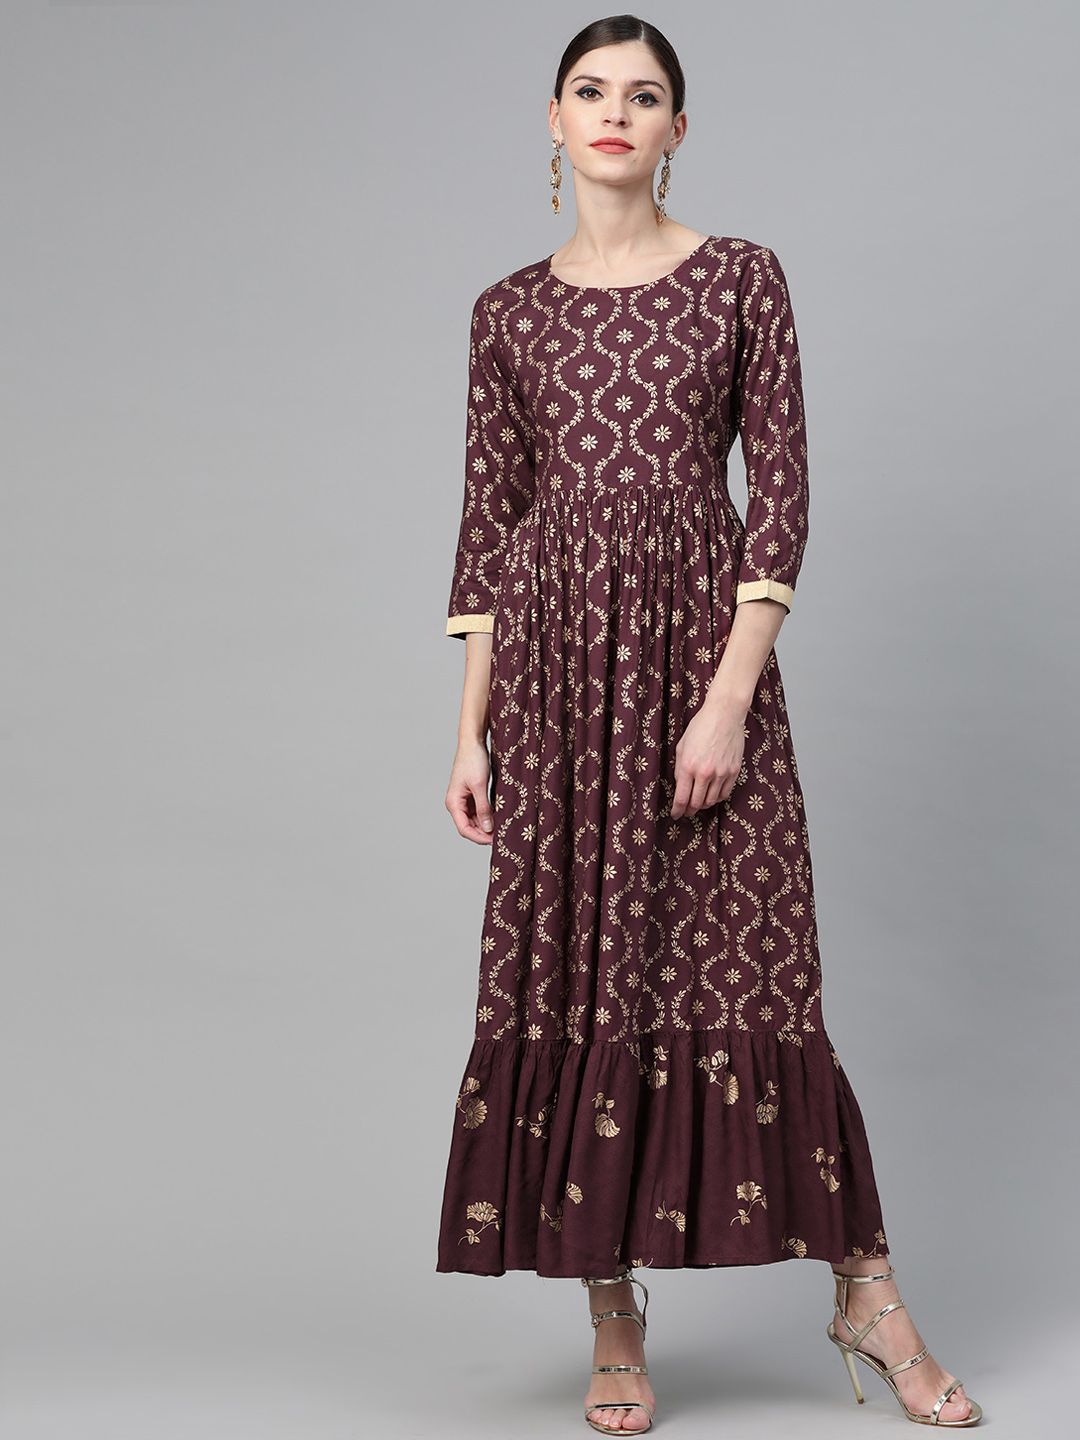 See Designs Women Burgundy & Golden Printed Maxi Dress Price in India